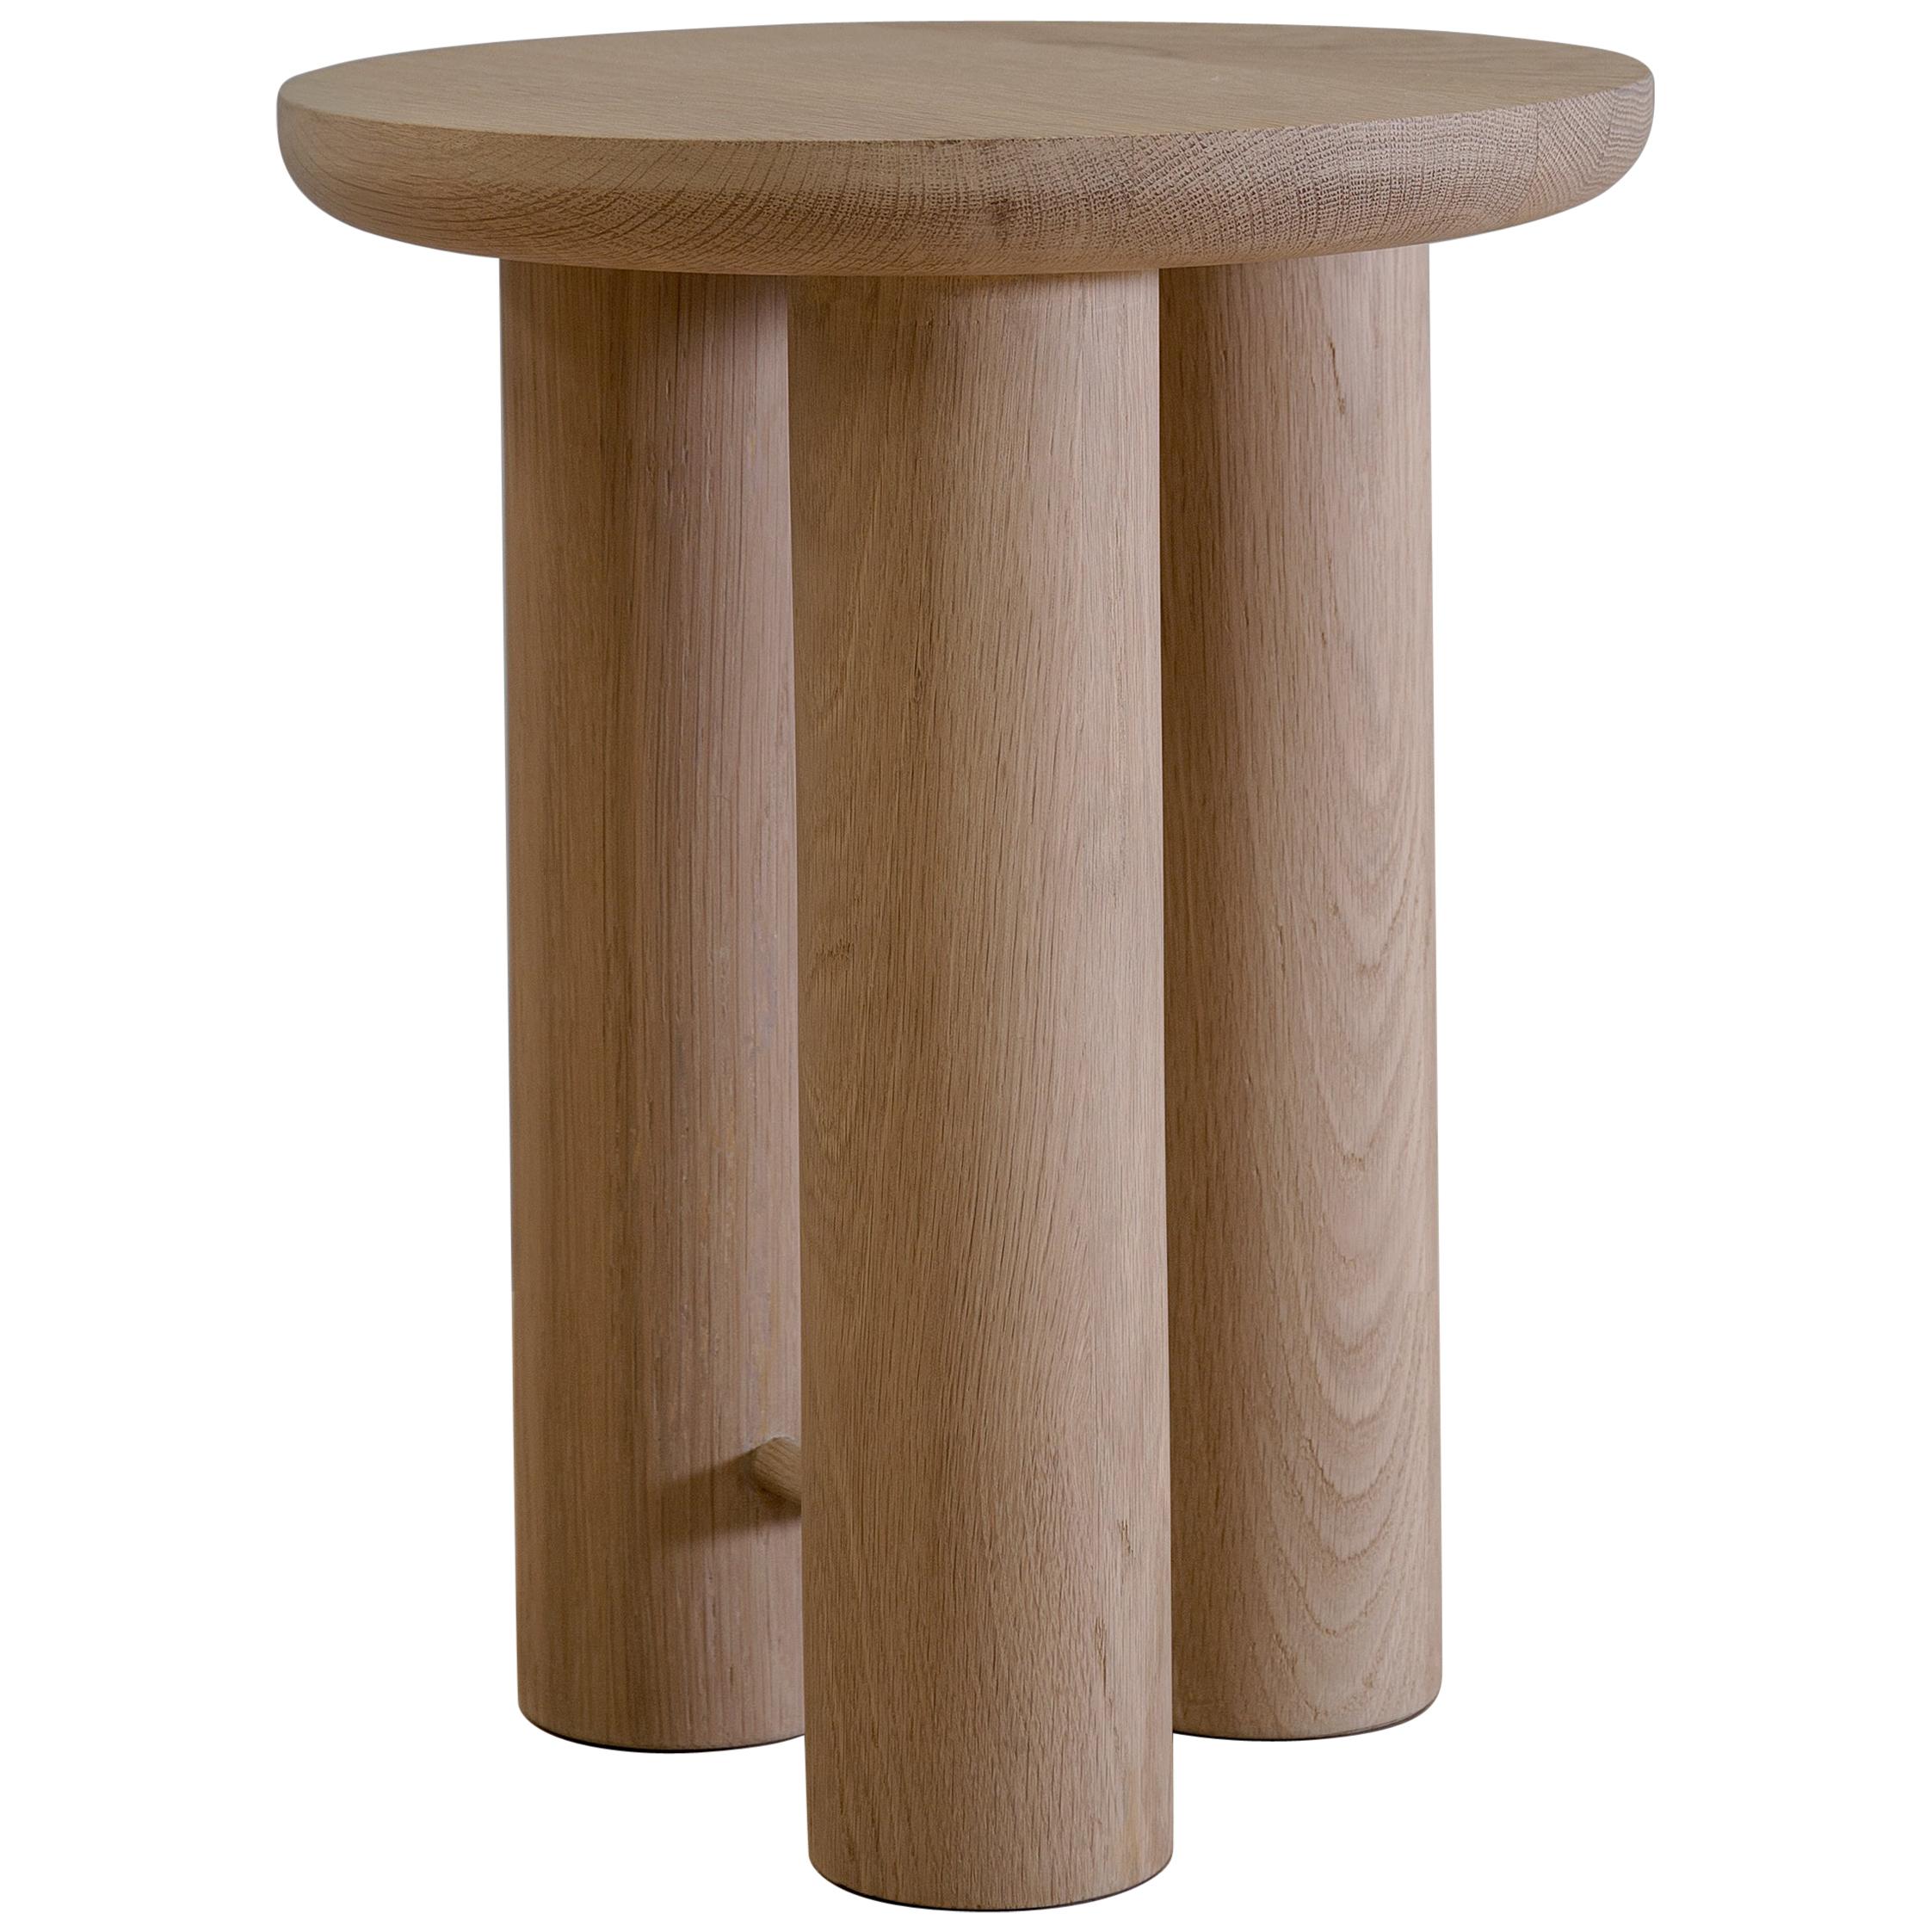 Antropología 02, Sculptural Stool and Side Table